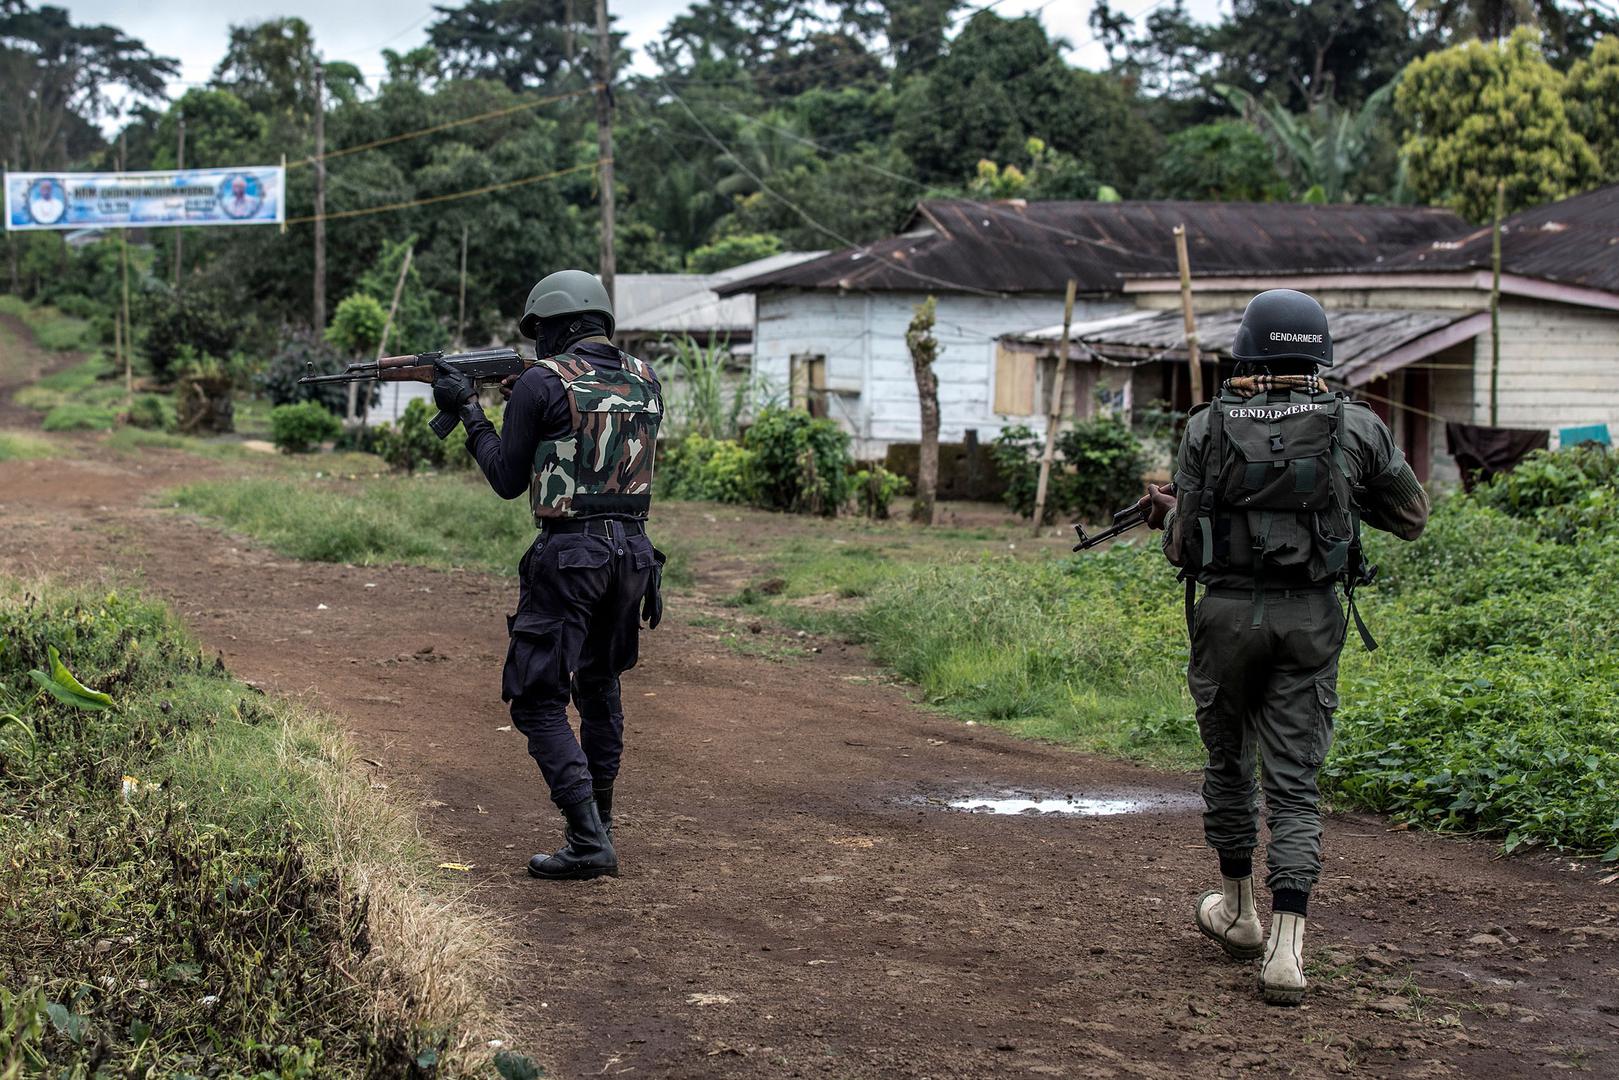 Security forces patrolling Muyuka, a town in the South West Region of Cameroon